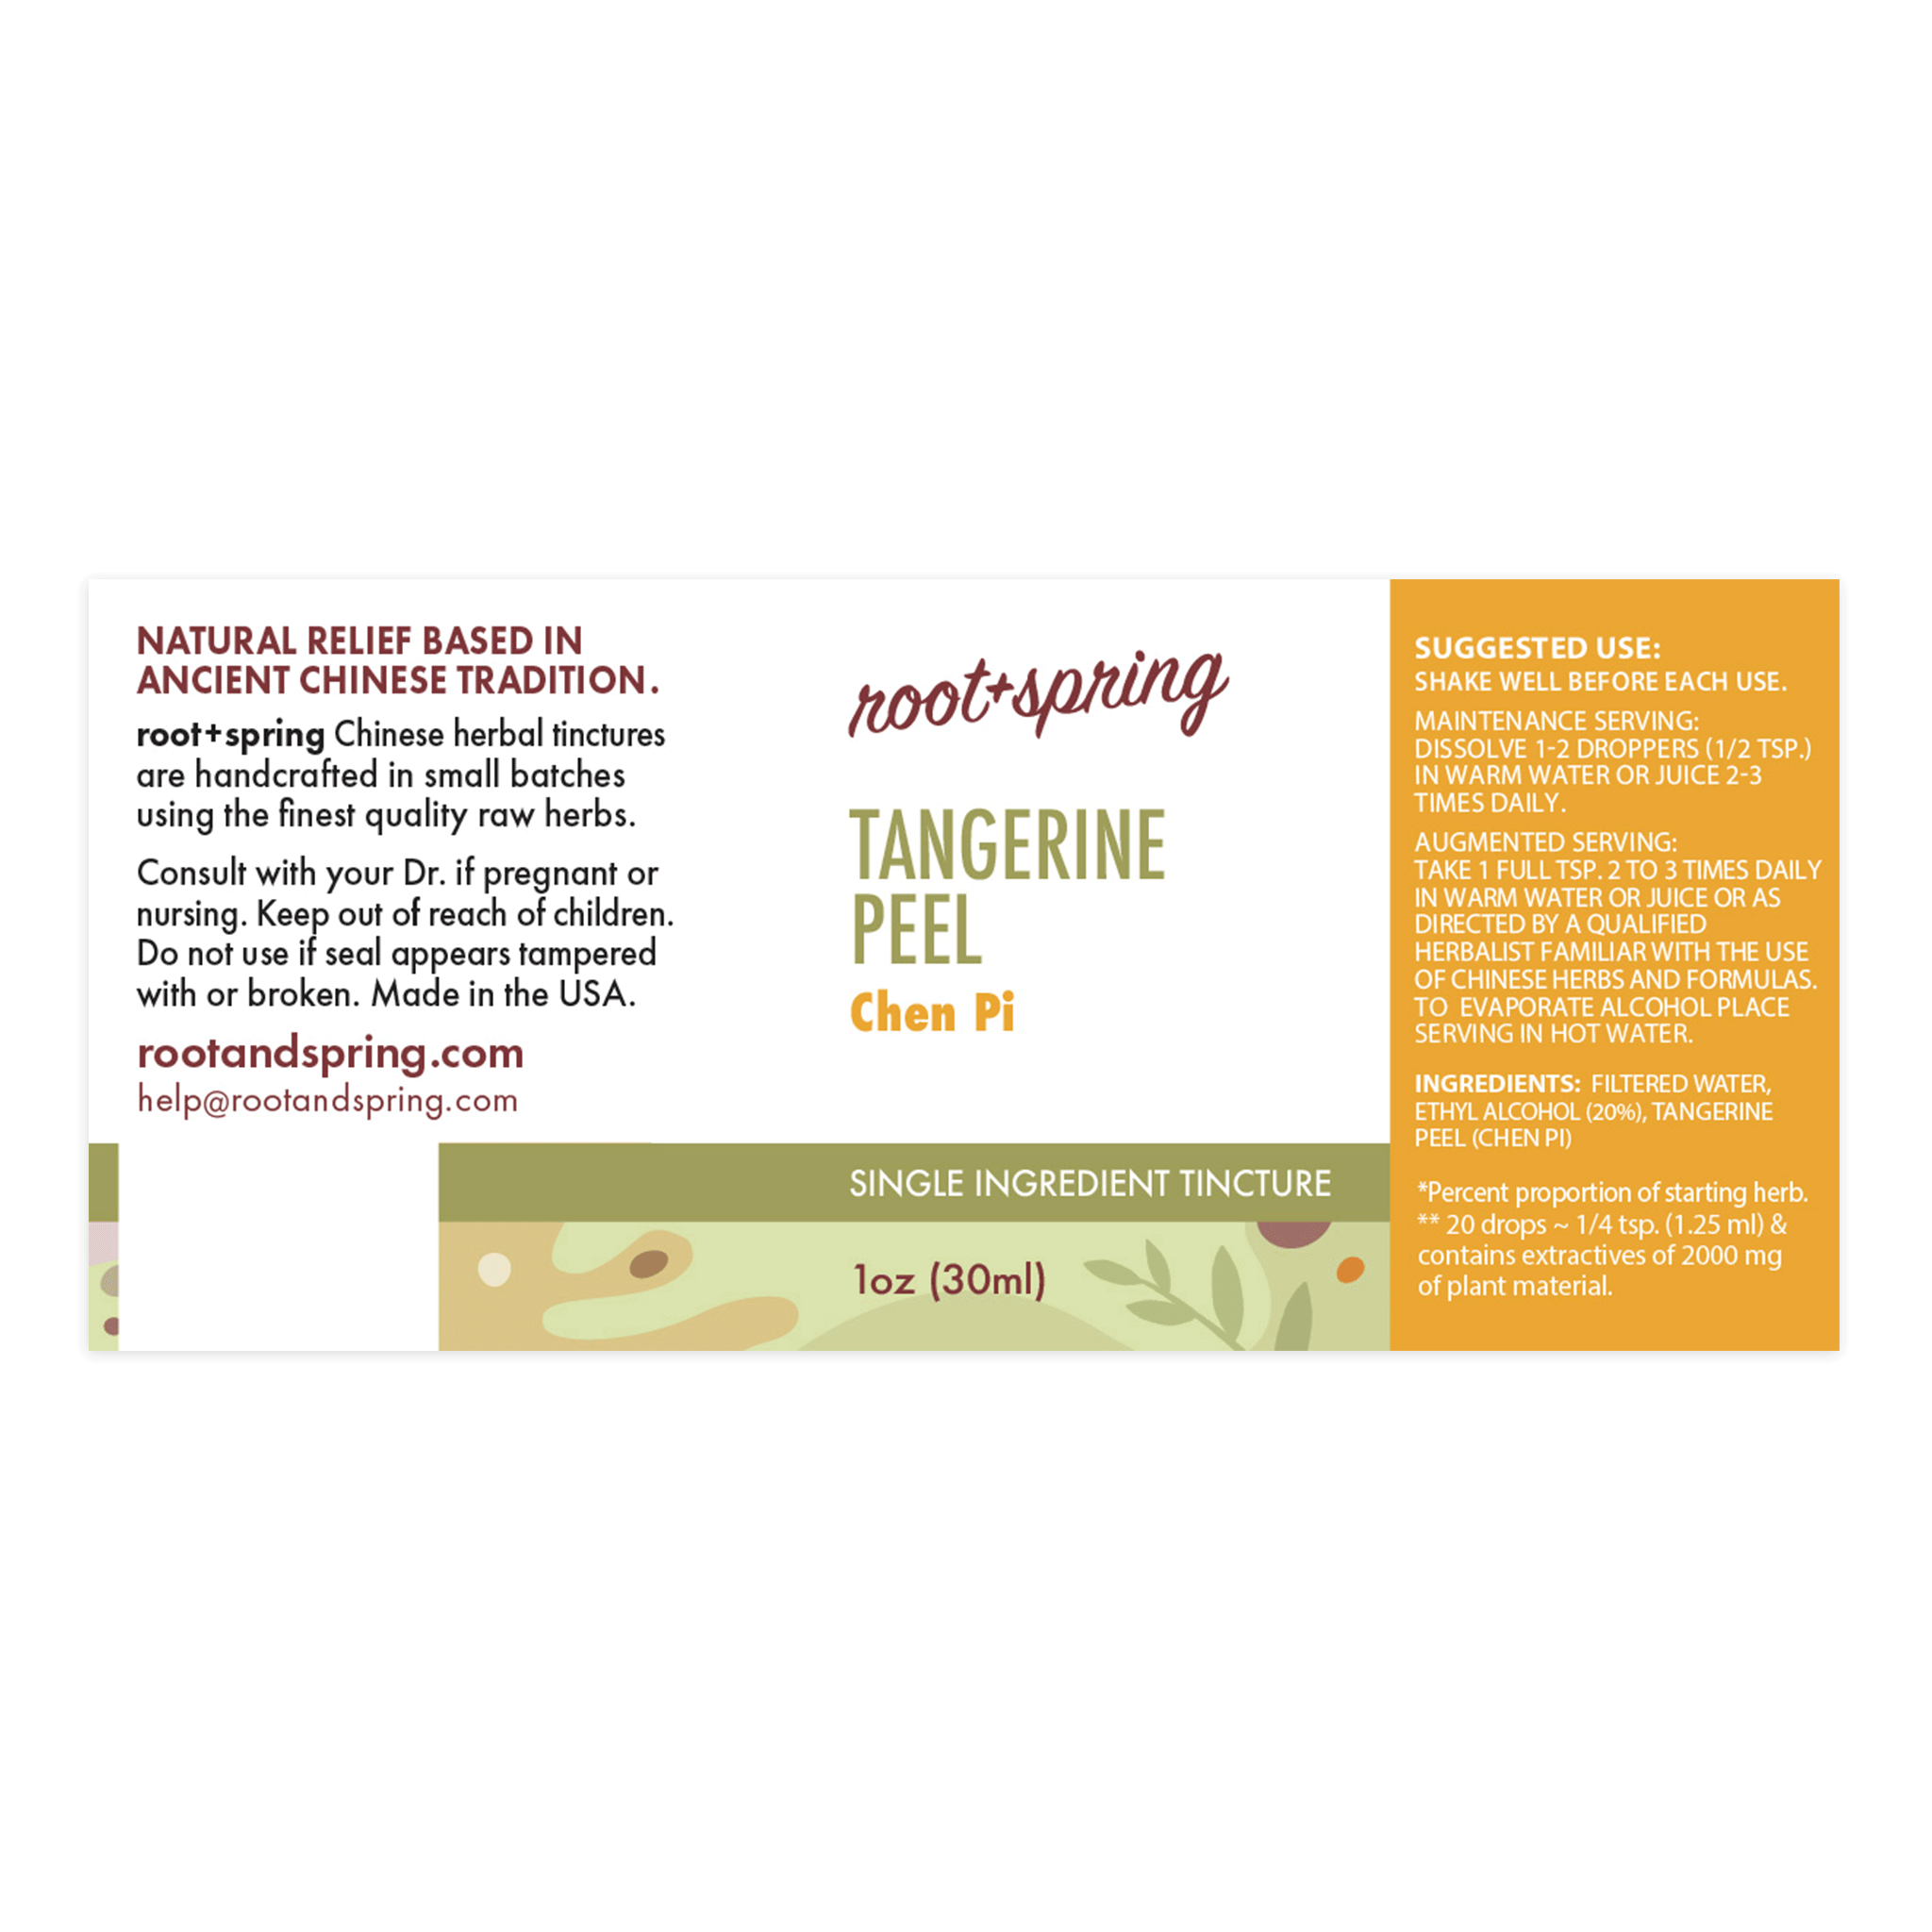 Label for Tangerine Peel, or Chen Pi, Herbal Tincture by root + spring.